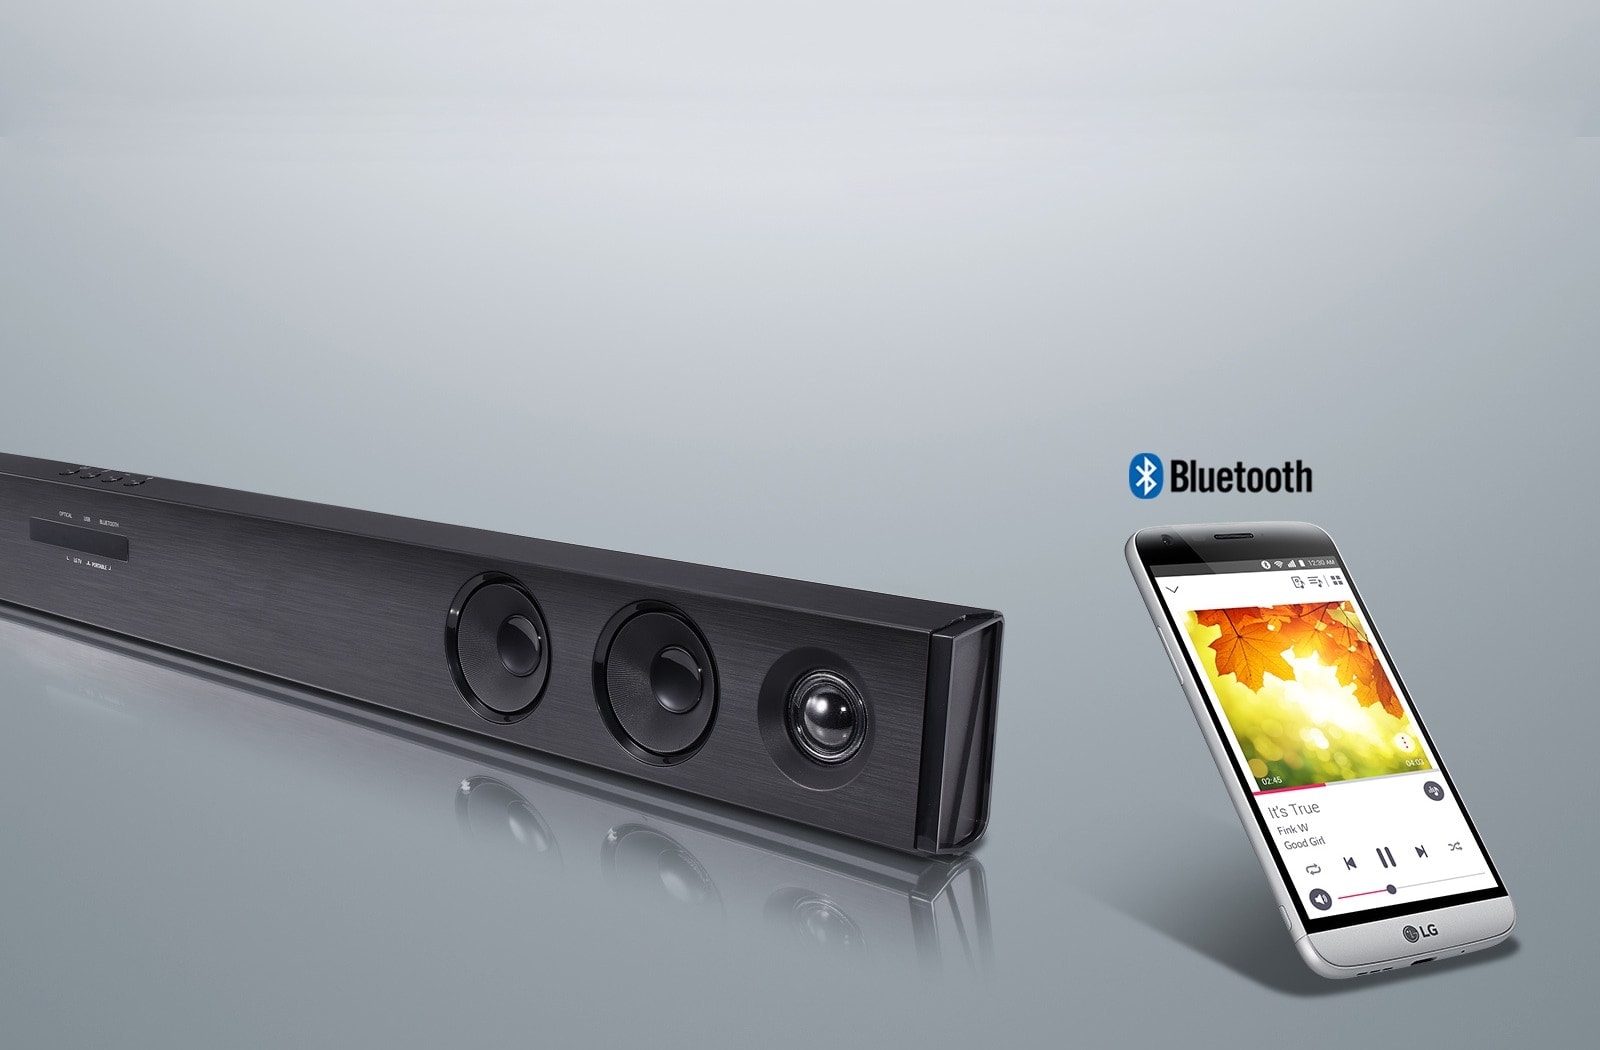 Bluetooth Stand-by, wake up your bar on demand